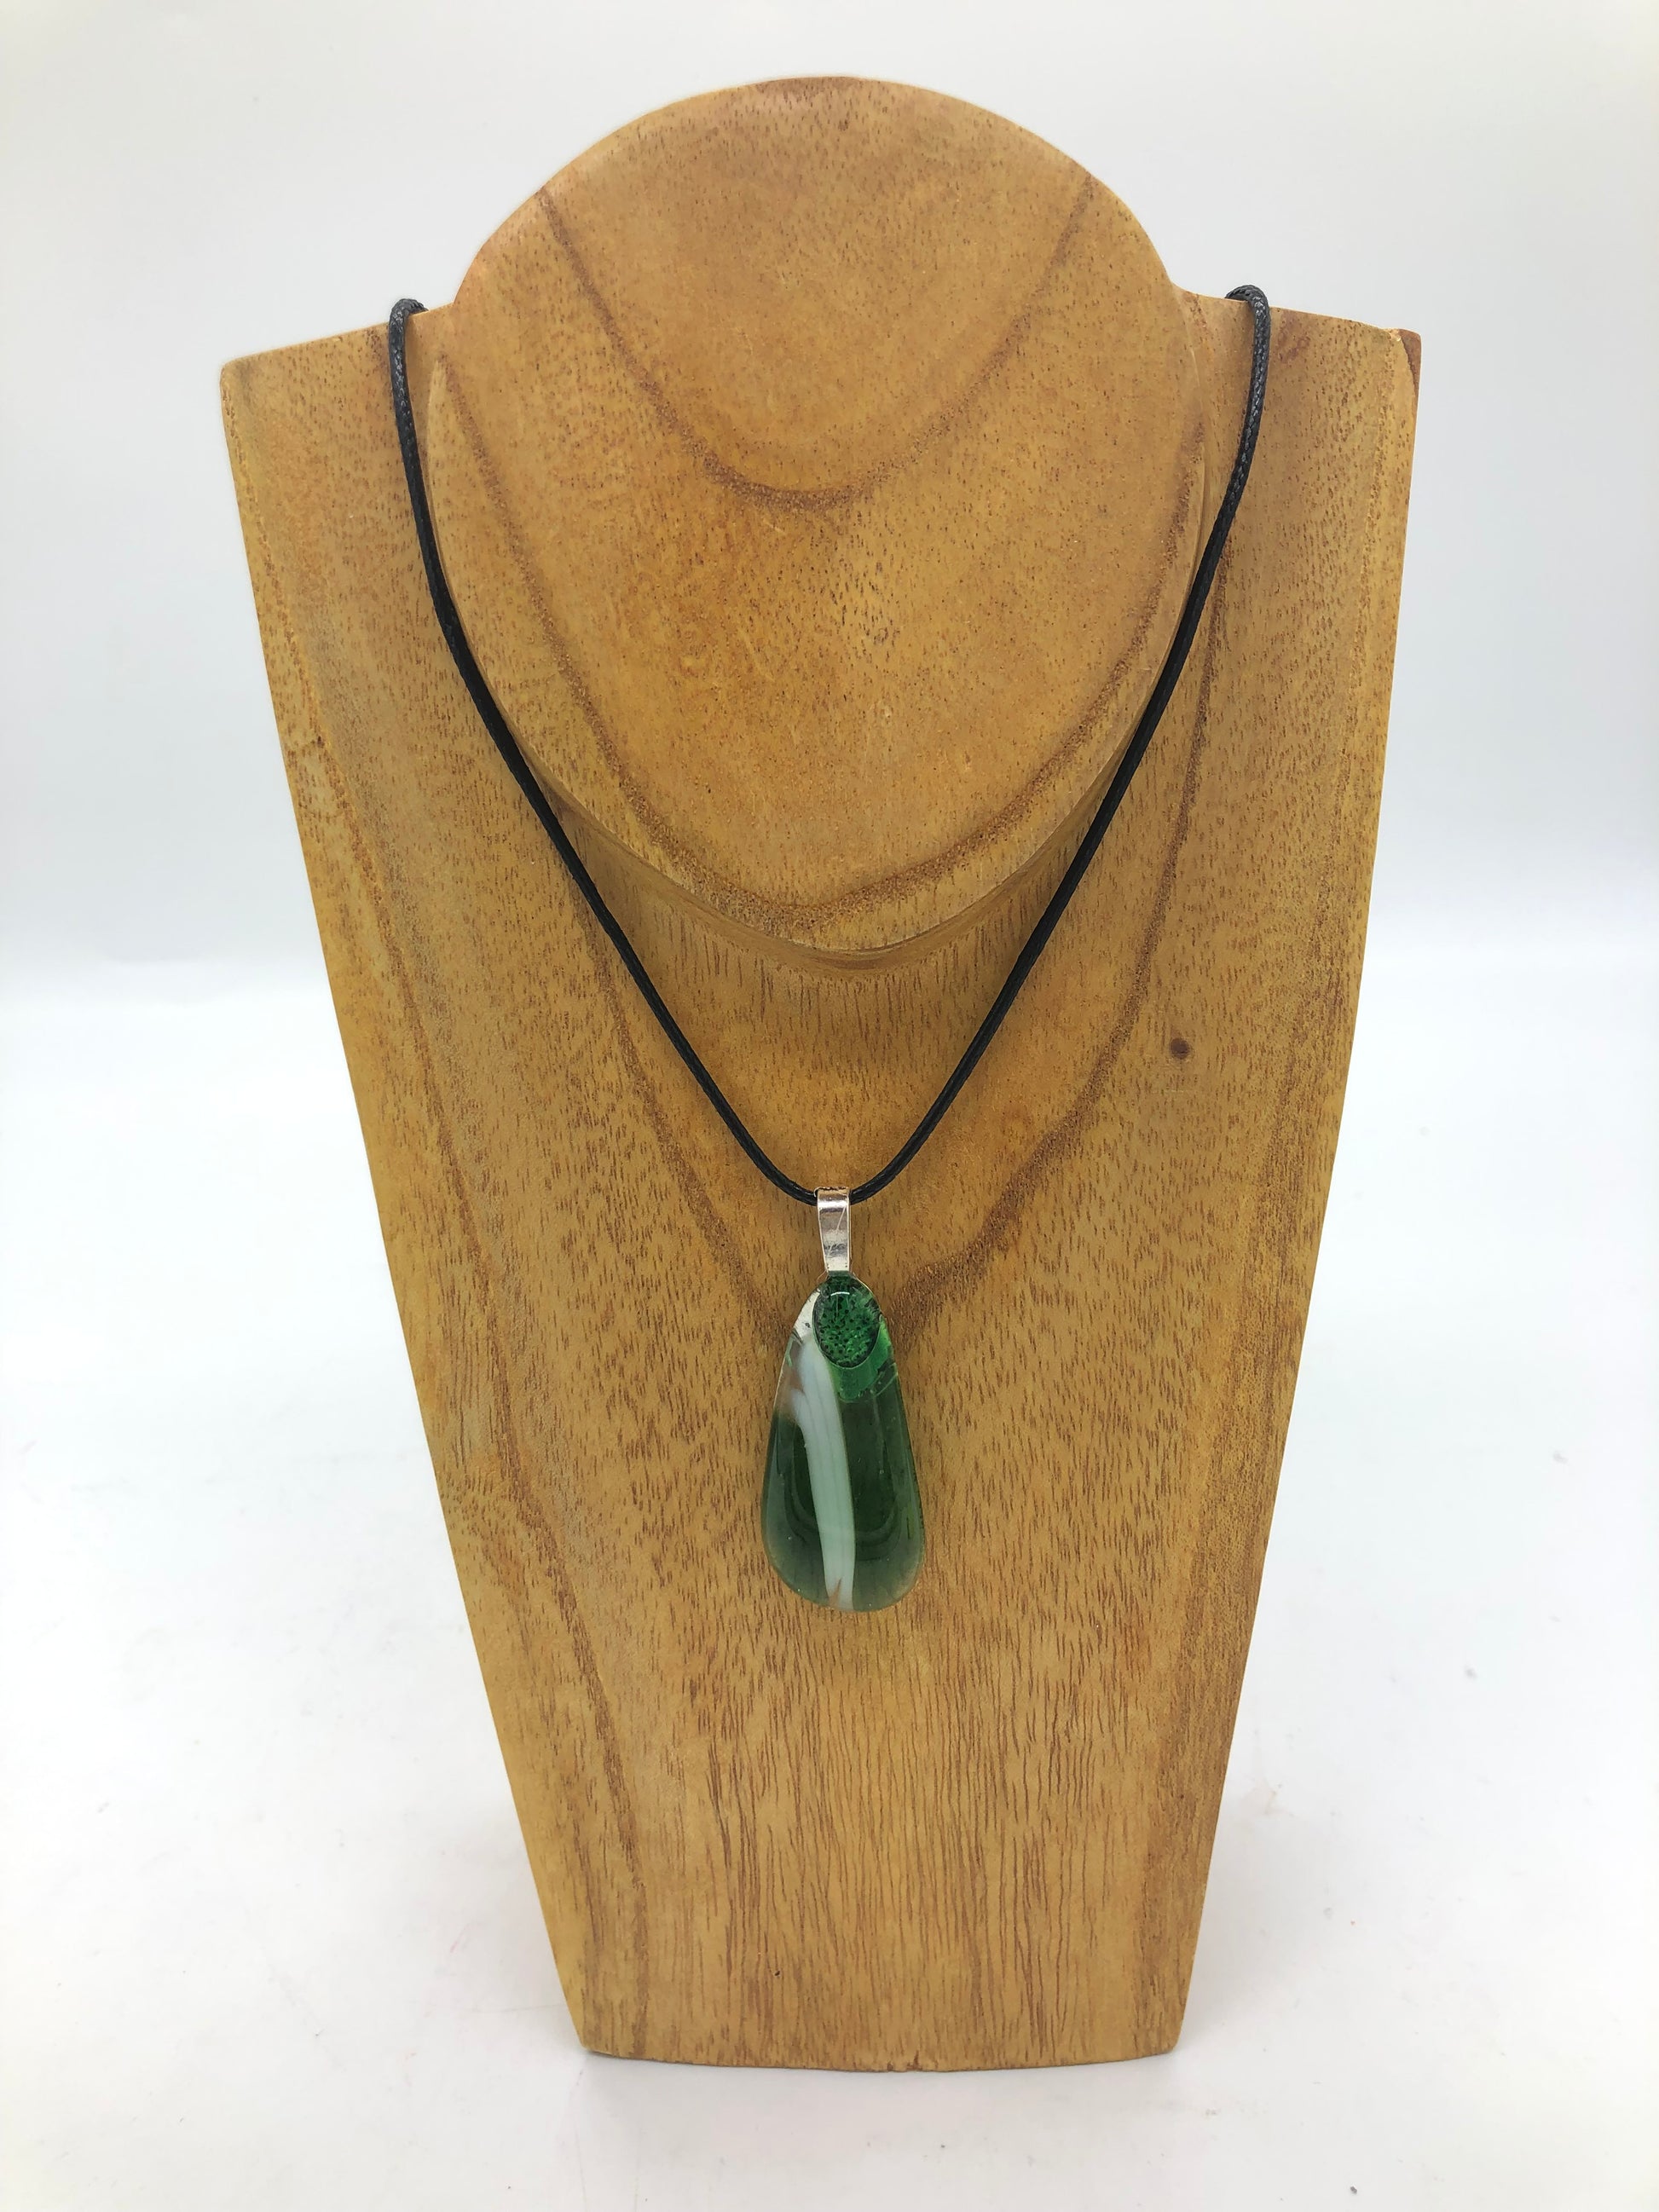 Fused glass necklace on a black cord, displayed on wooden holder.  Necklace design is along oval in green and white